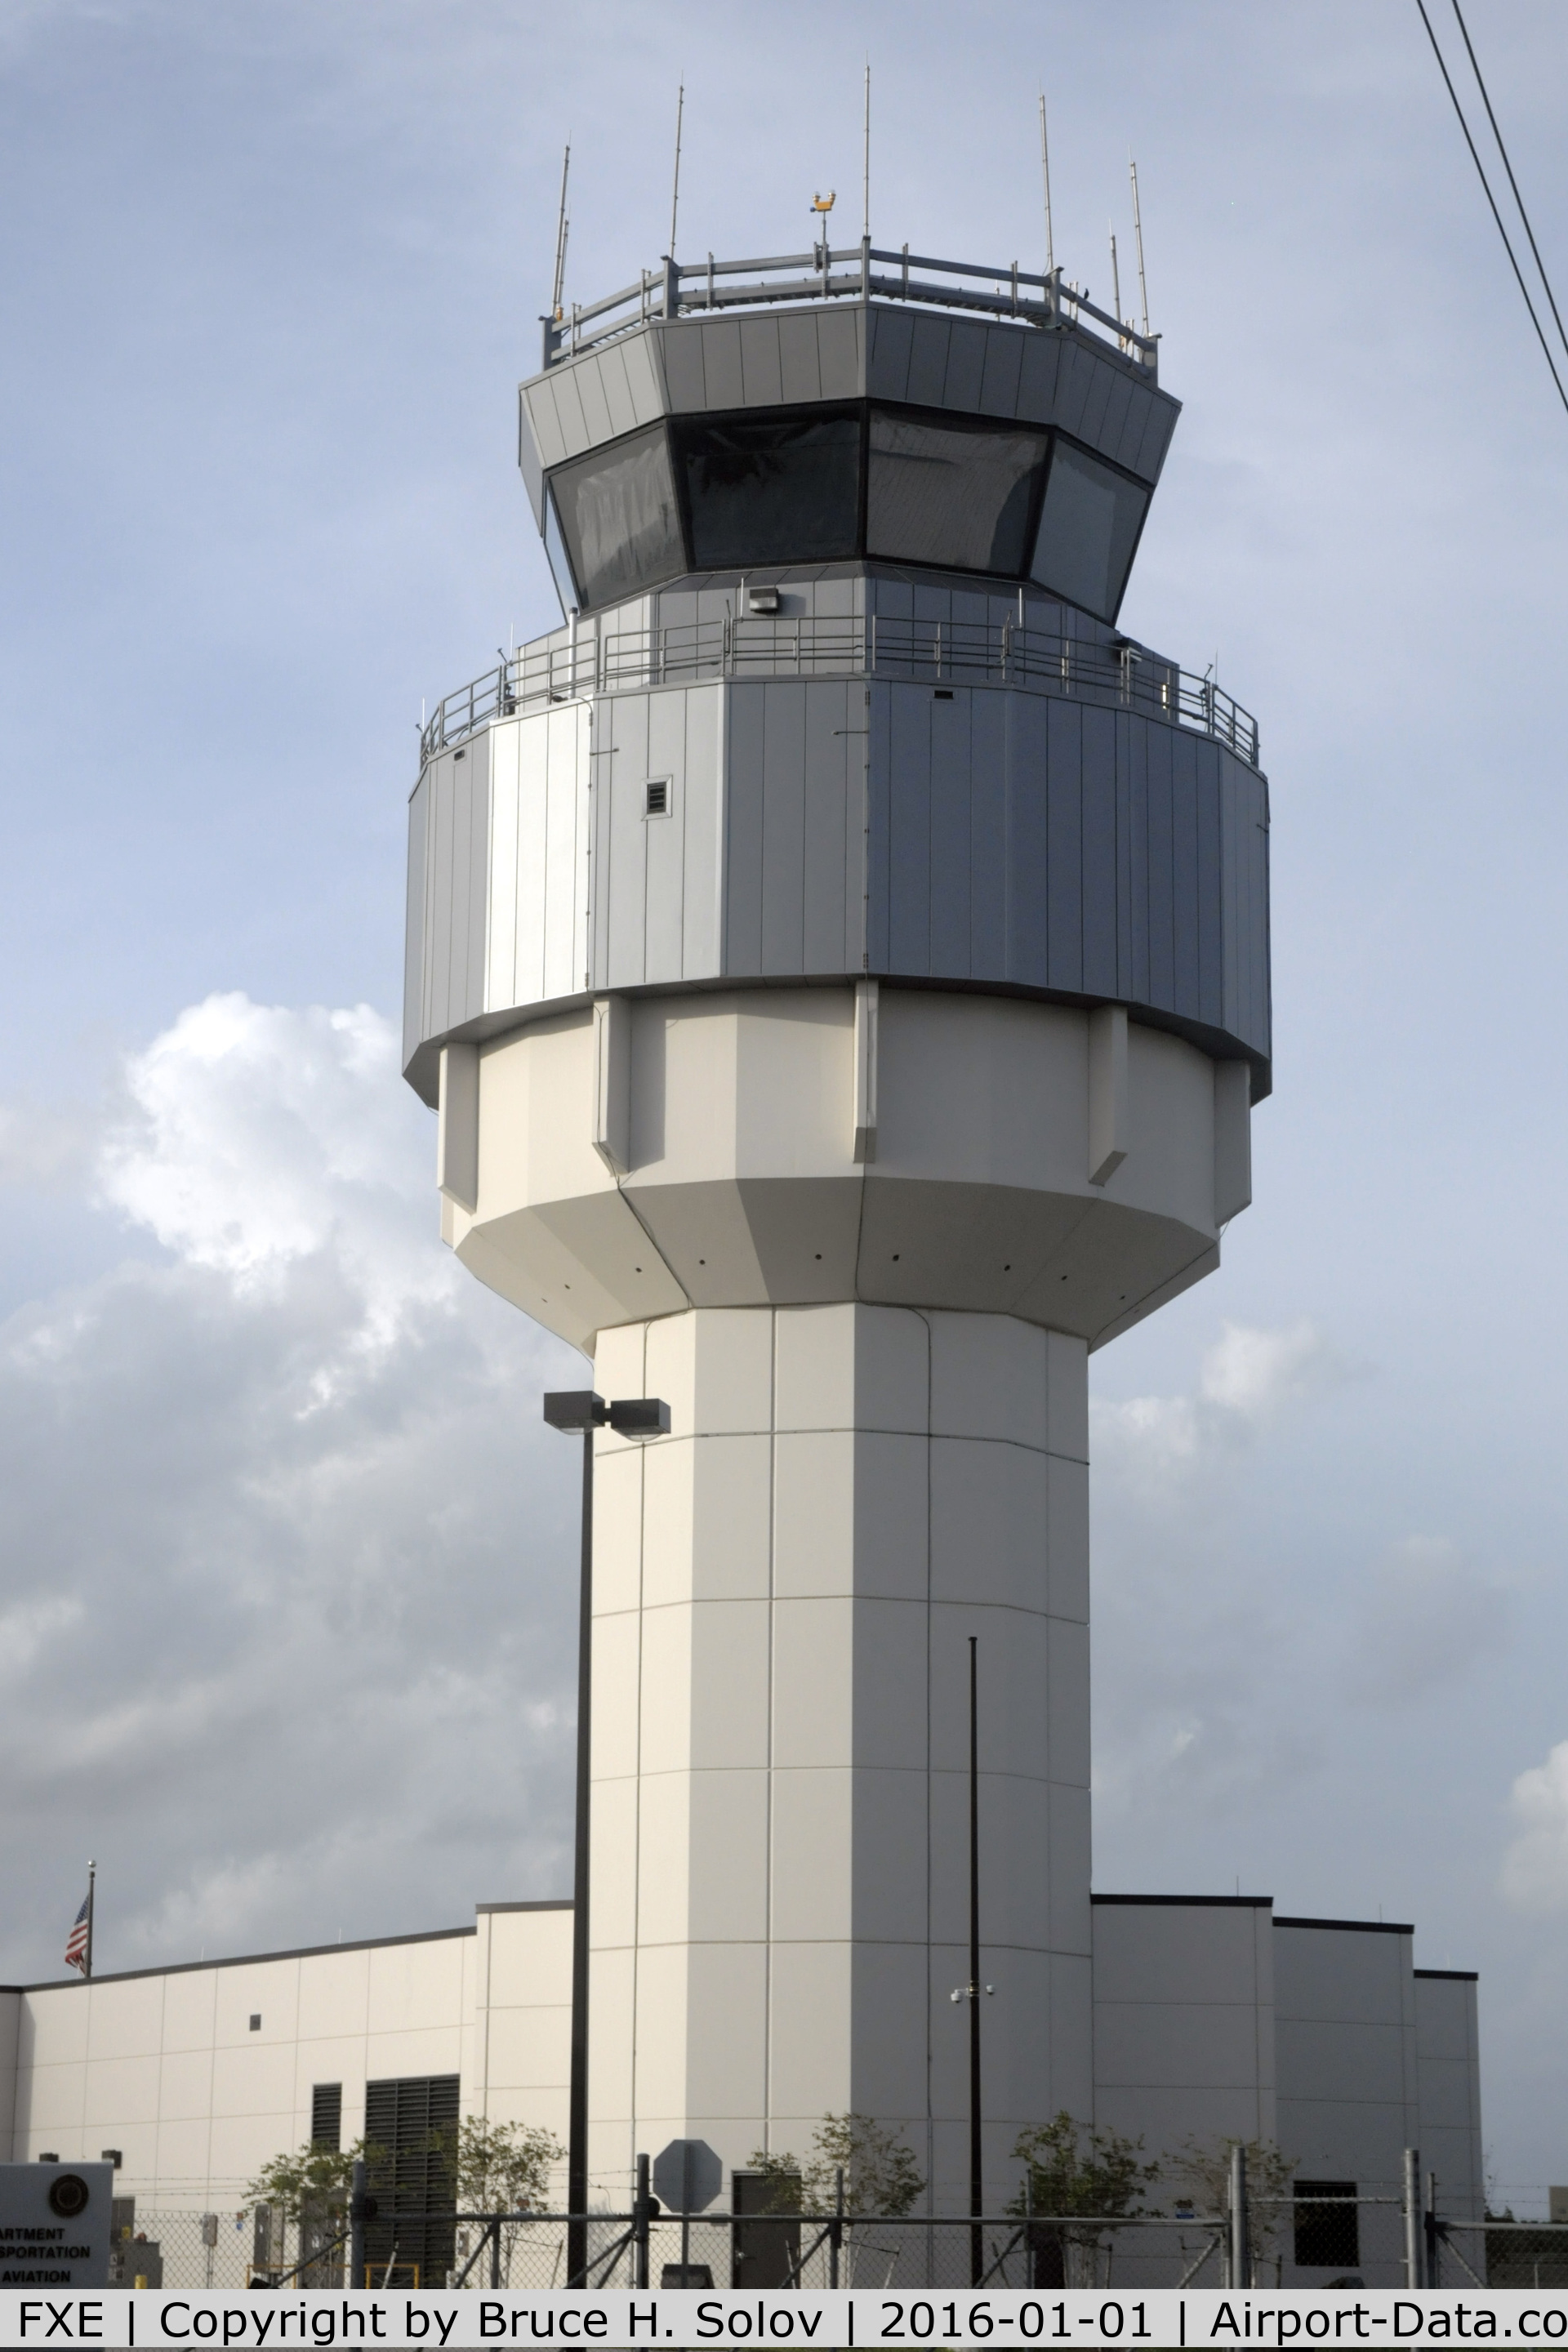 Fort Lauderdale Executive Airport (FXE) - New ATC tower